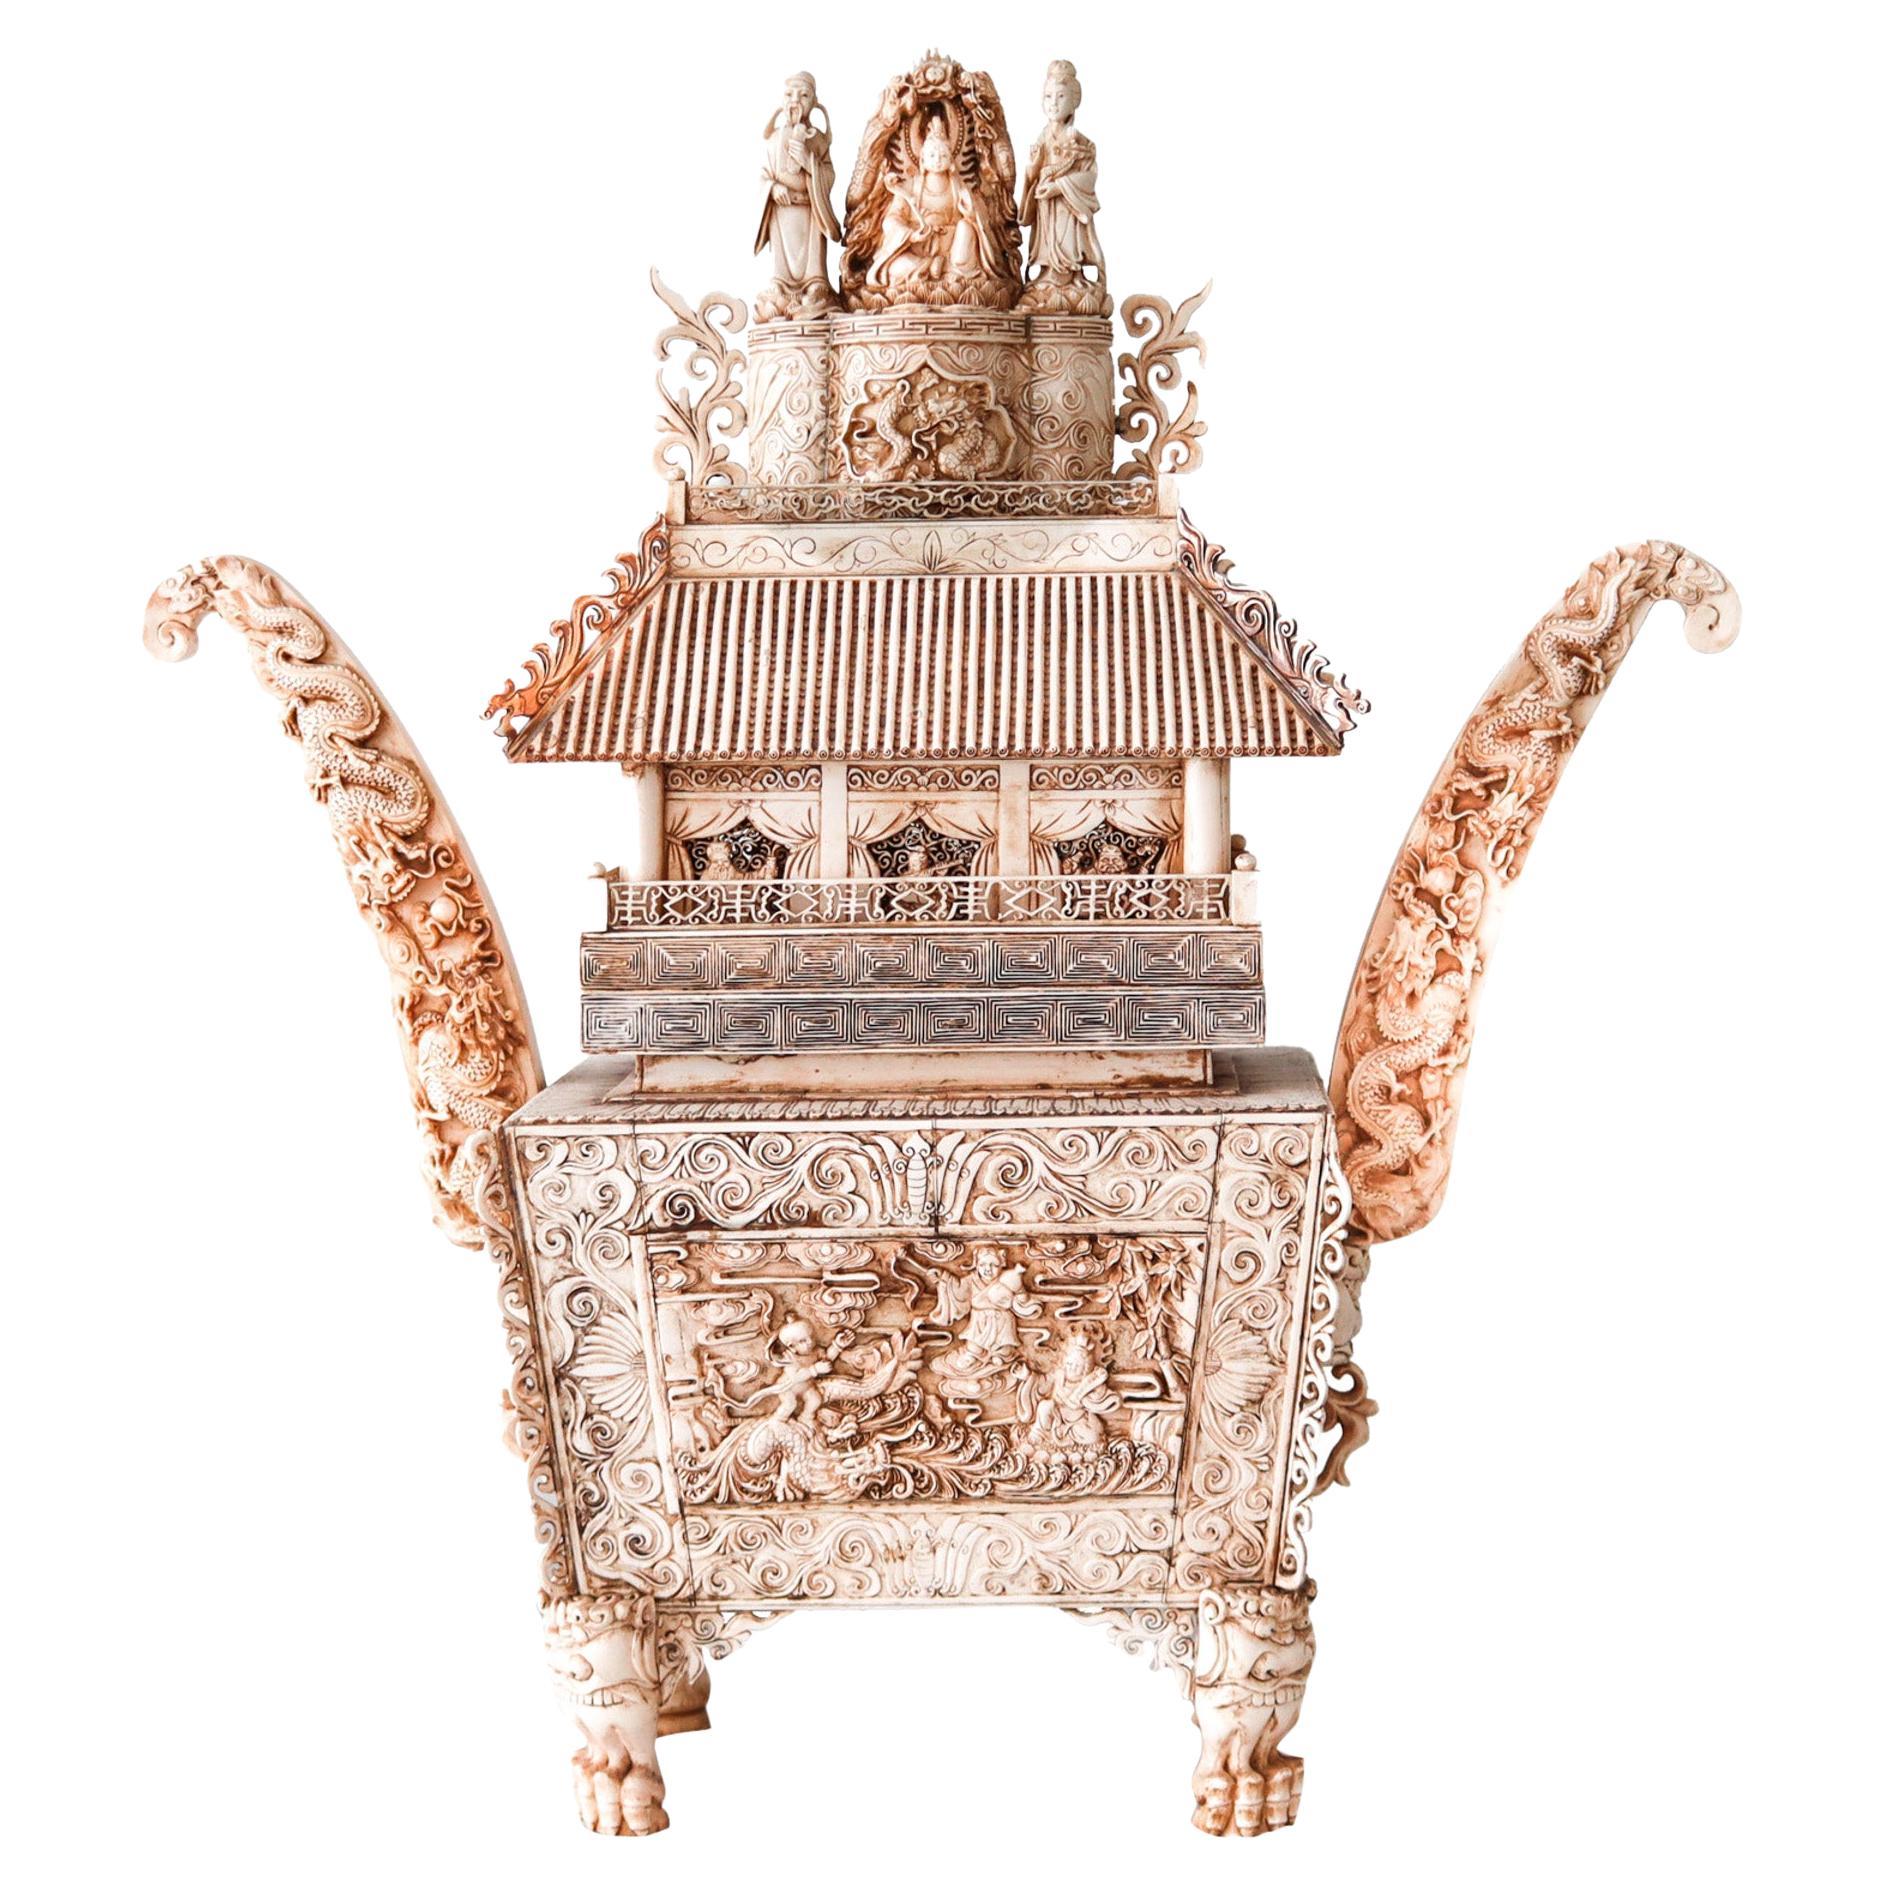 Chinoise 1900 Dynasty Qing Bodhisattva Altar Temple-Pagoda In Wood And Carvings